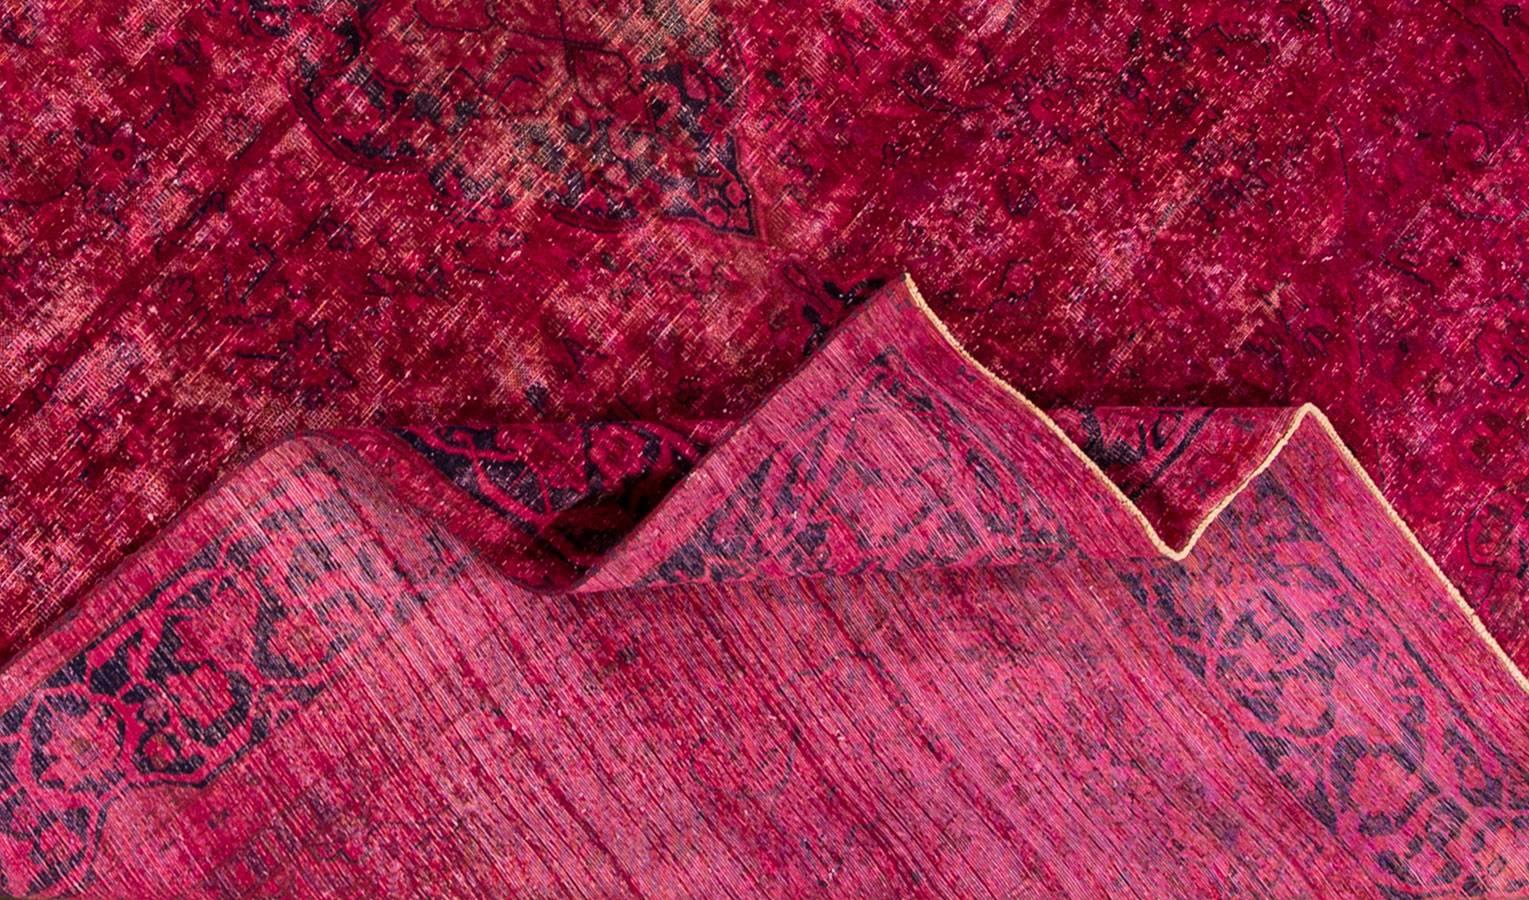 Vintage 1945 Persian overdyed rug. This piece has a field that was dyed bright pink, and has a visible border details and a medallion in the centre. Measures 9.01 x 12.06.